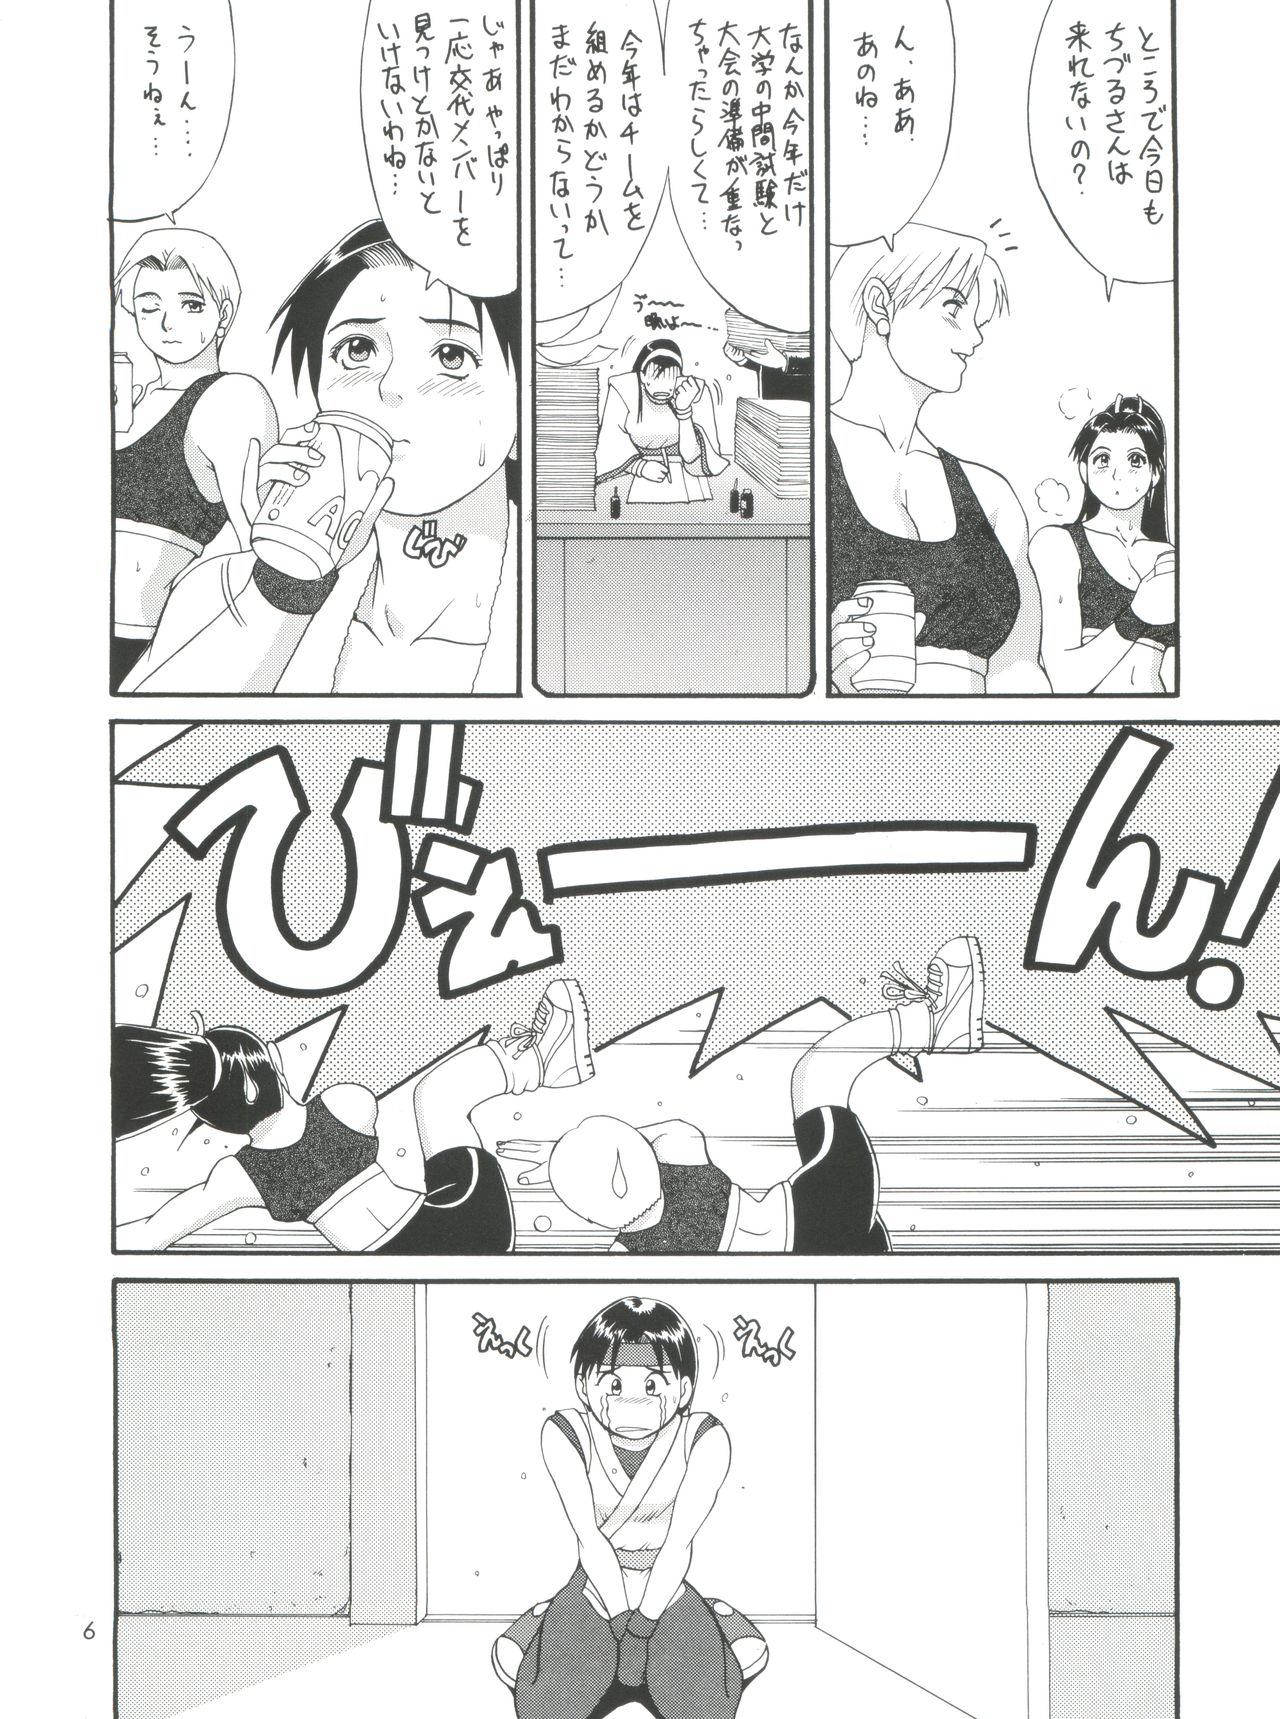 (CR24) [Saigado (Ishoku Dougen)] The Yuri & Friends '98 (King of Fighters) page 5 full